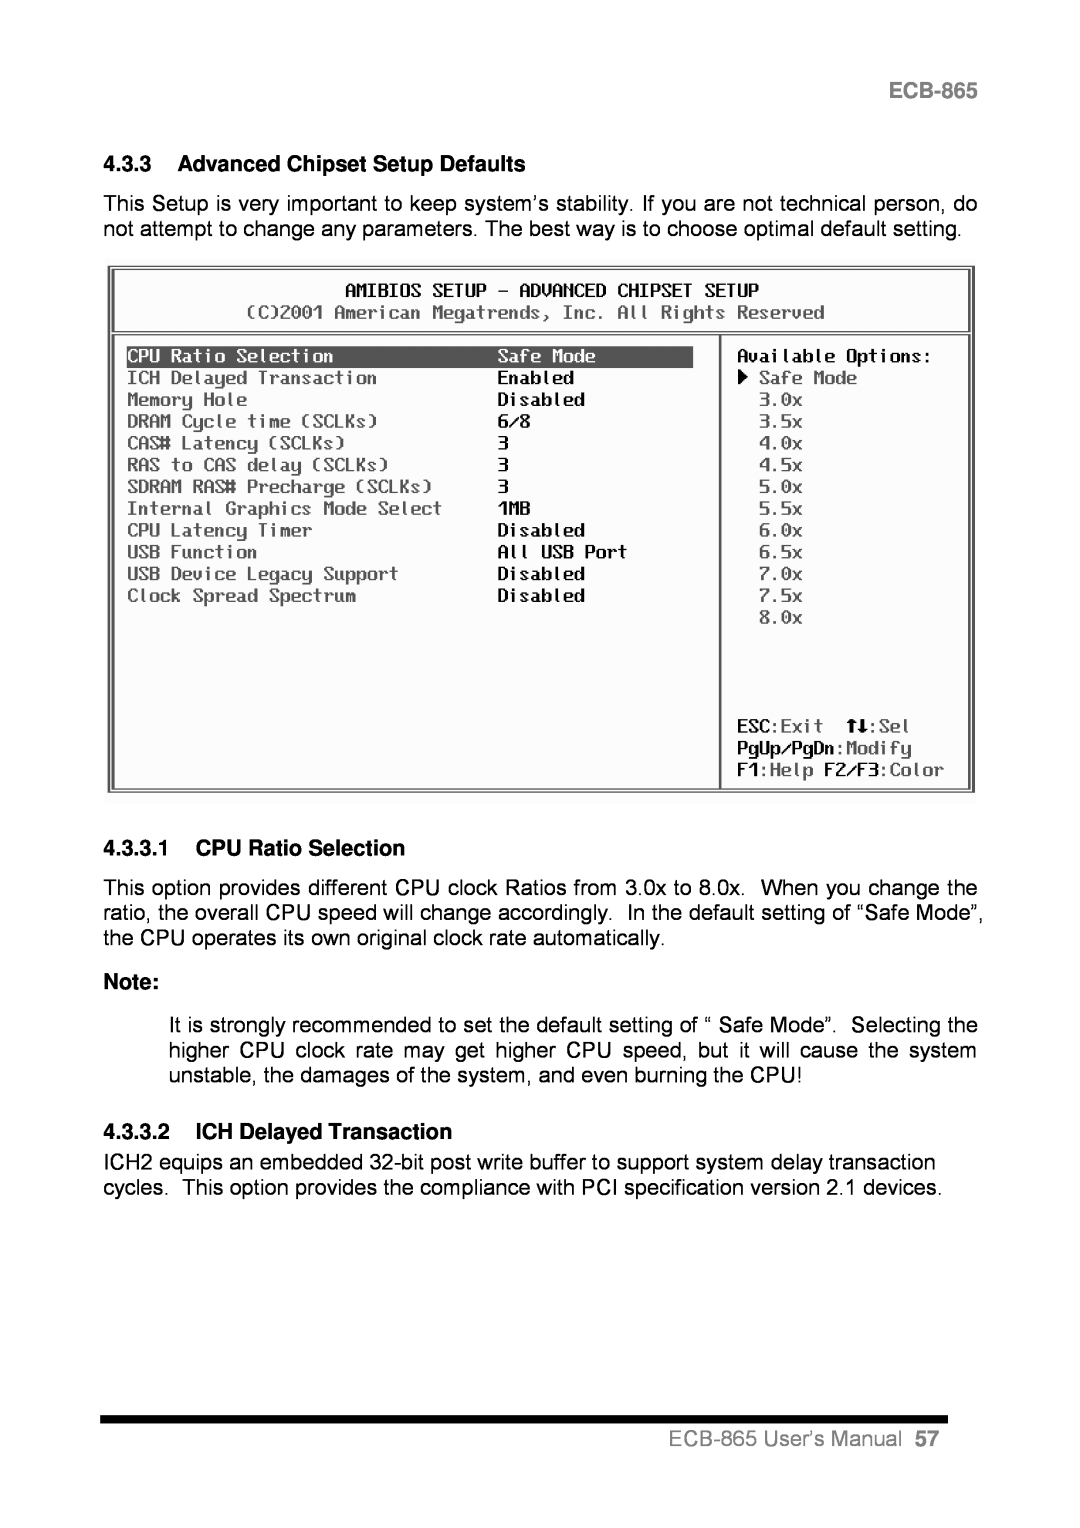 Intel ECB-865 user manual 4.3.3Advanced Chipset Setup Defaults, 4.3.3.1CPU Ratio Selection, 4.3.3.2ICH Delayed Transaction 